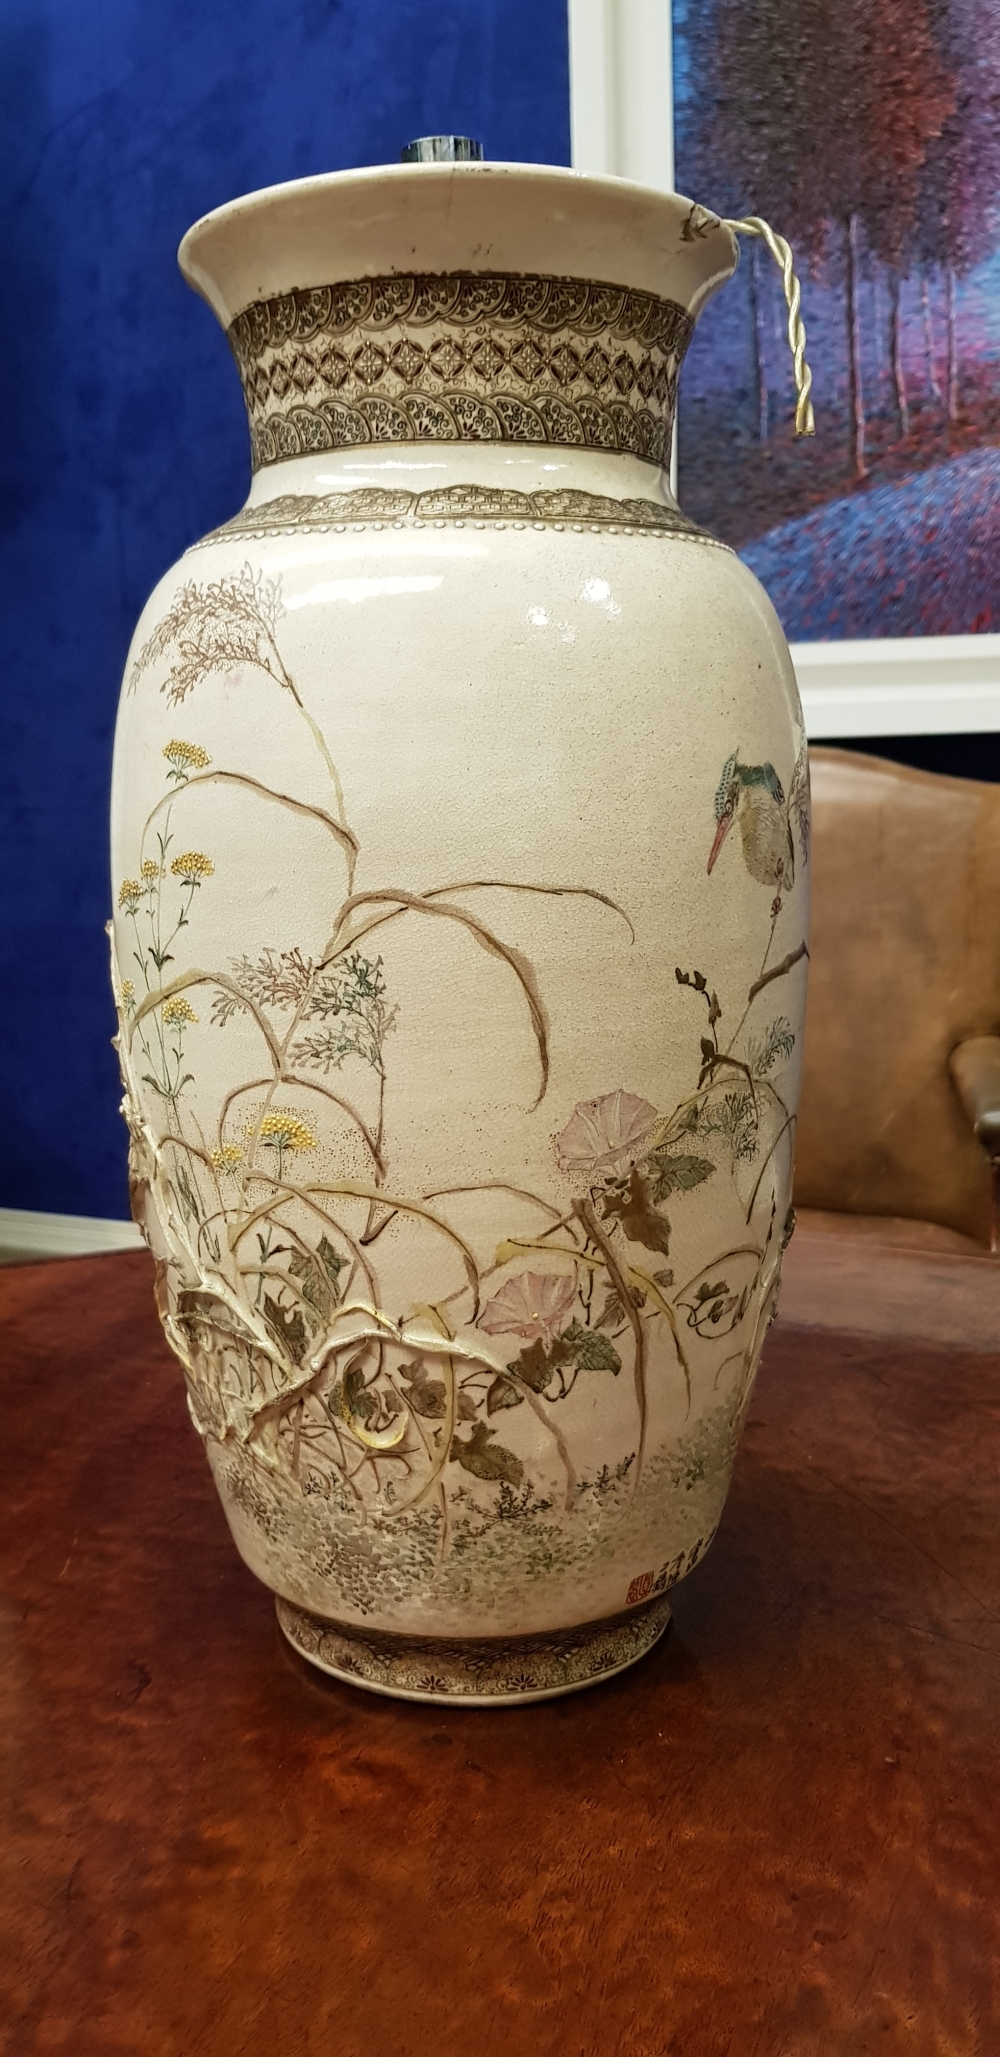 A CHINESE RAISED RELIEF WORK VASE, with images of birds and butterflies, a calligraphic - Image 5 of 9